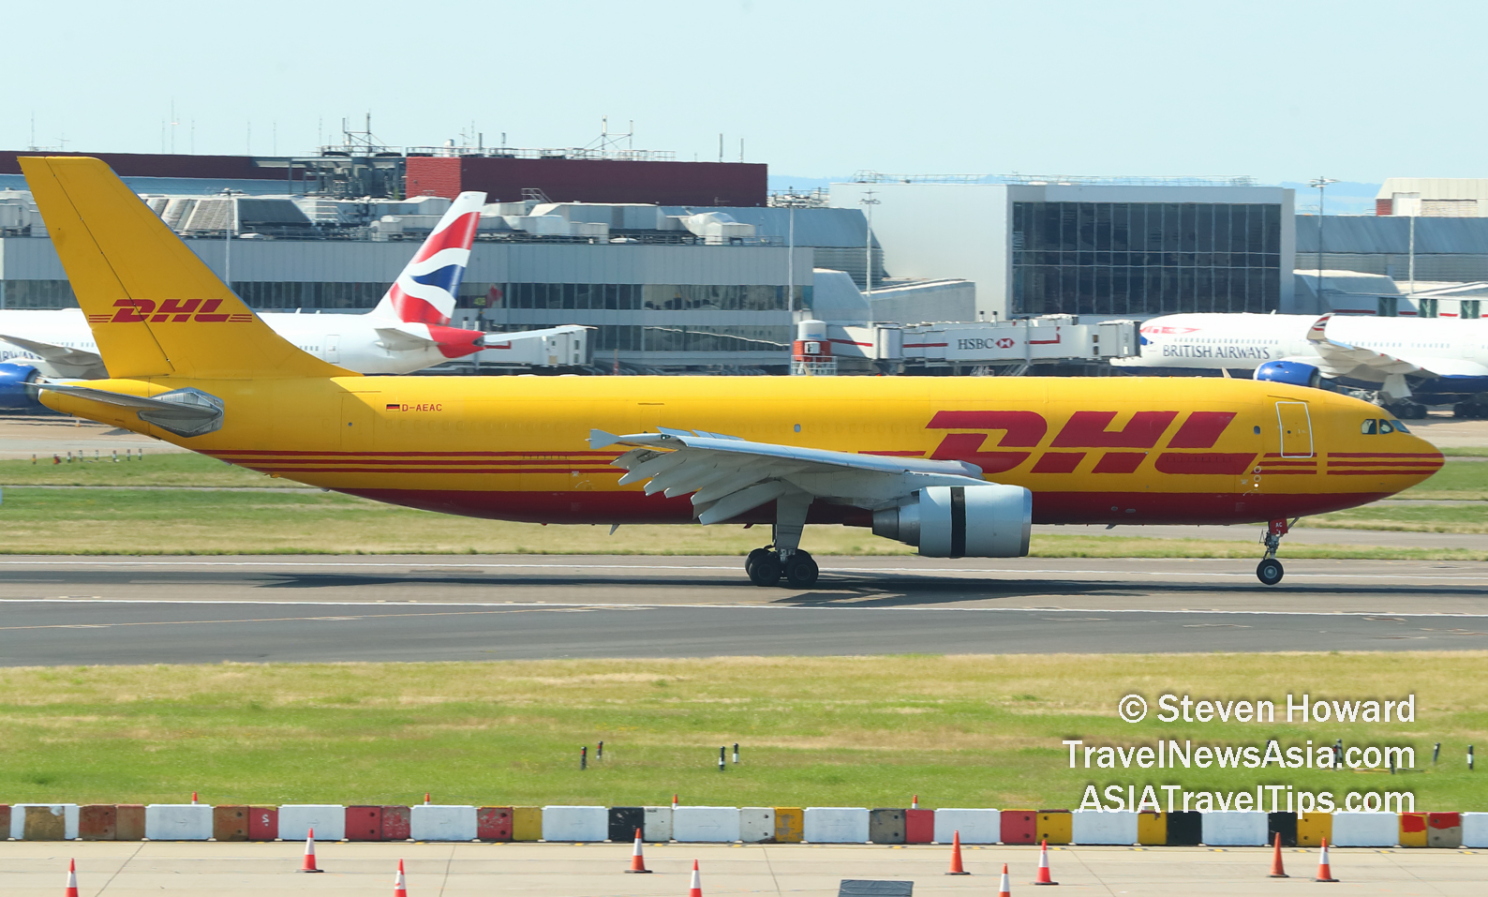 DHL Airbus A330 reg: D-AEAC Picture by Steven Howard of TravelNewsAsia.com Click to enlarge.